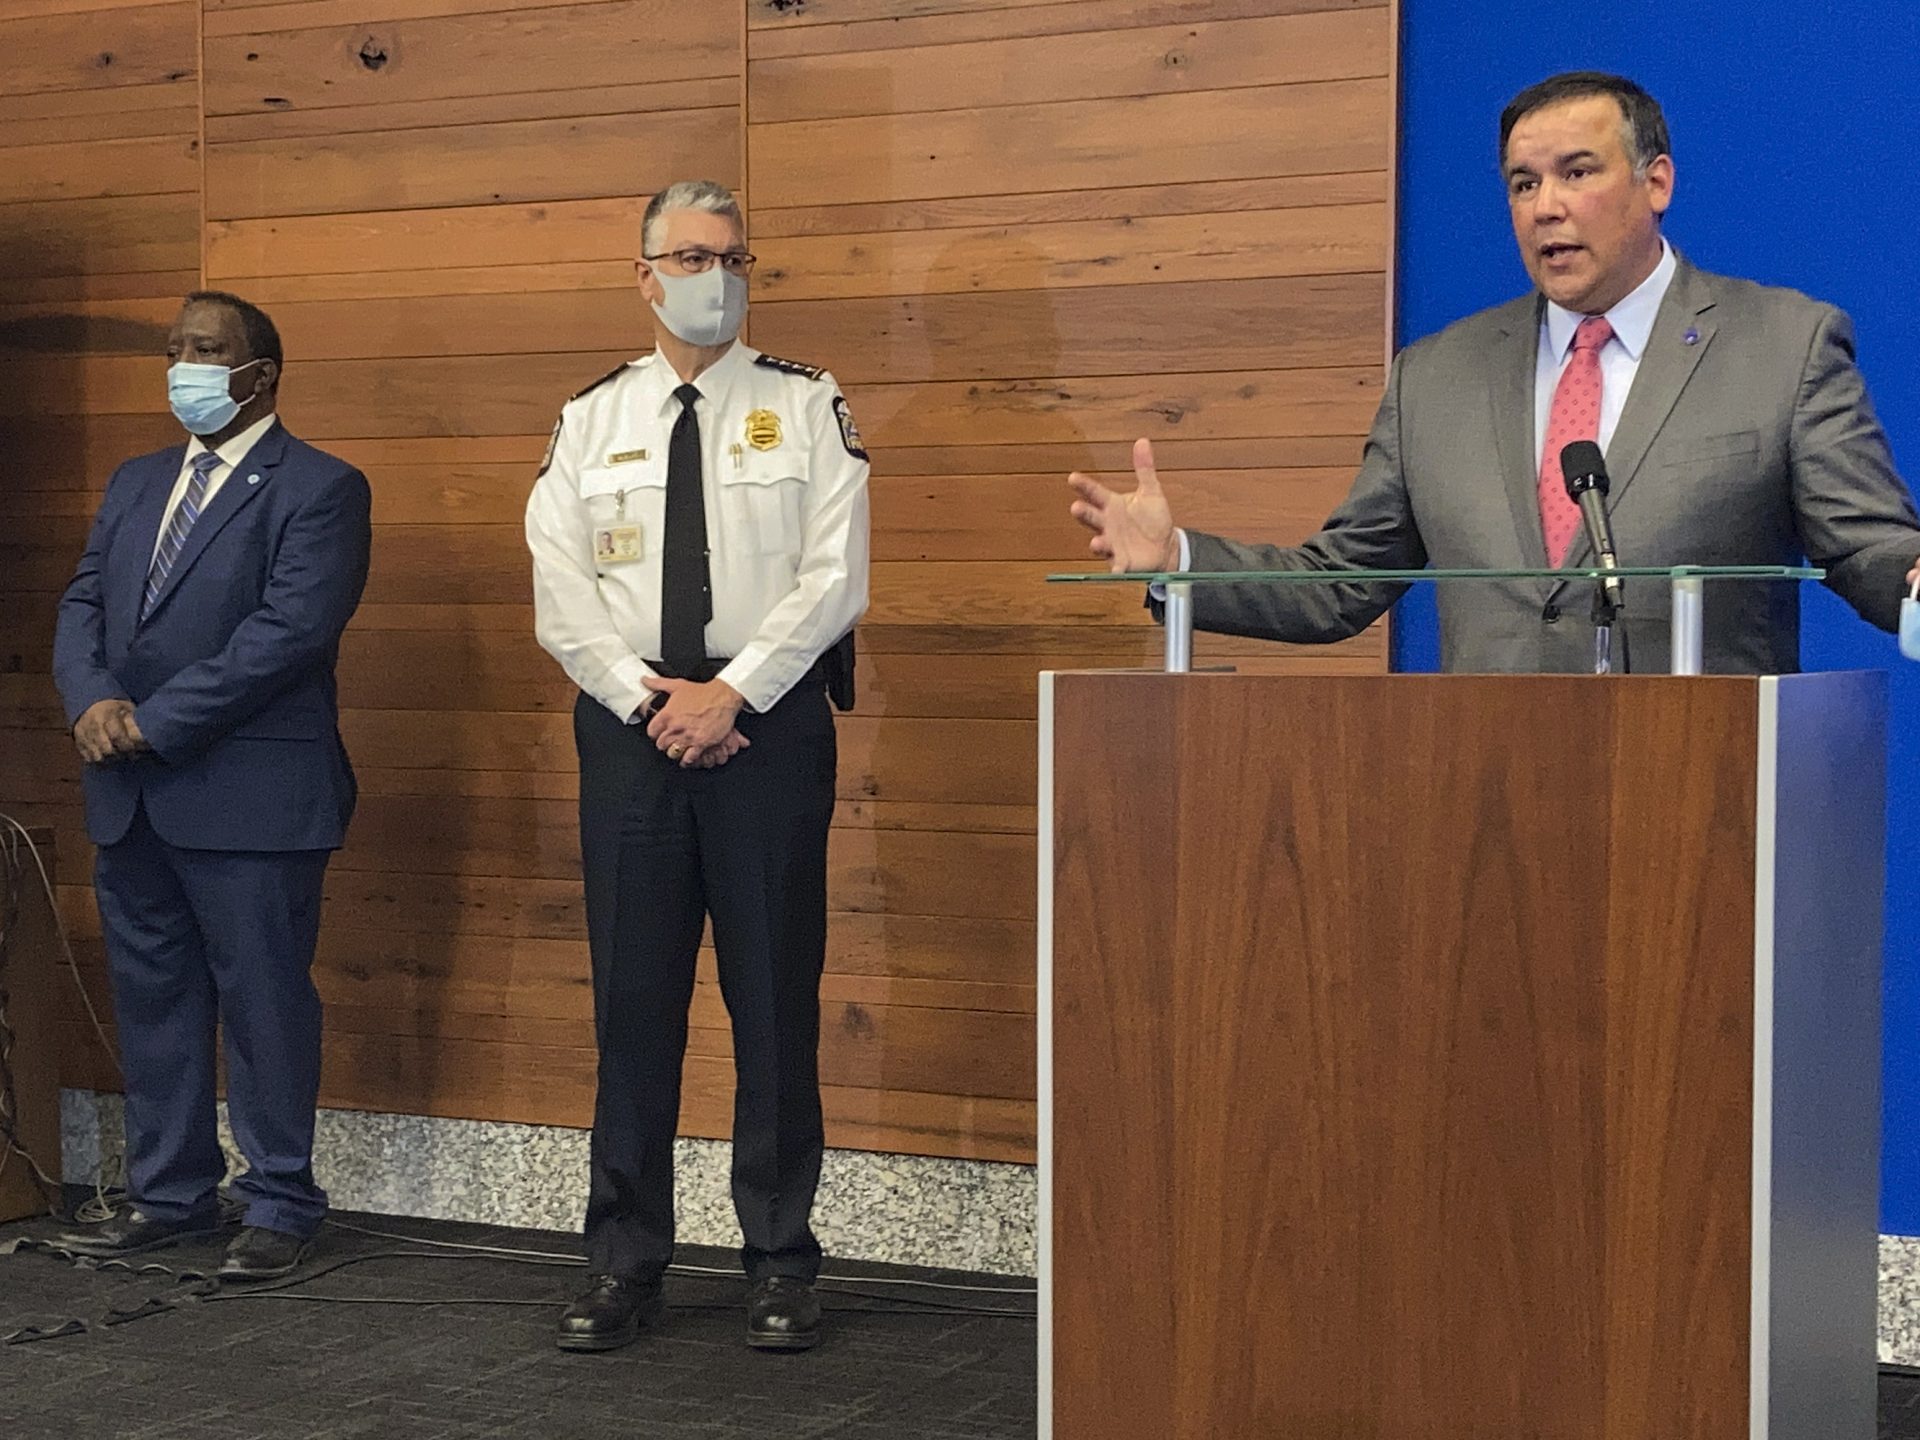 Columbus Mayor Andrew Ginther, right, speaks during a news conference, Wednesday, April 21, 2021, about the Tuesday fatal police shooting of 16-year-old Ma'Khia Bryant, as she swung a knife at two other people in Columbus, Ohio. Ginther said the entire community bears responsibility for Ma'Khia's death. Columbus Public Safety Director Ned Pettus Jr., left, and interim Police Chief Michael Woods, center, listen.